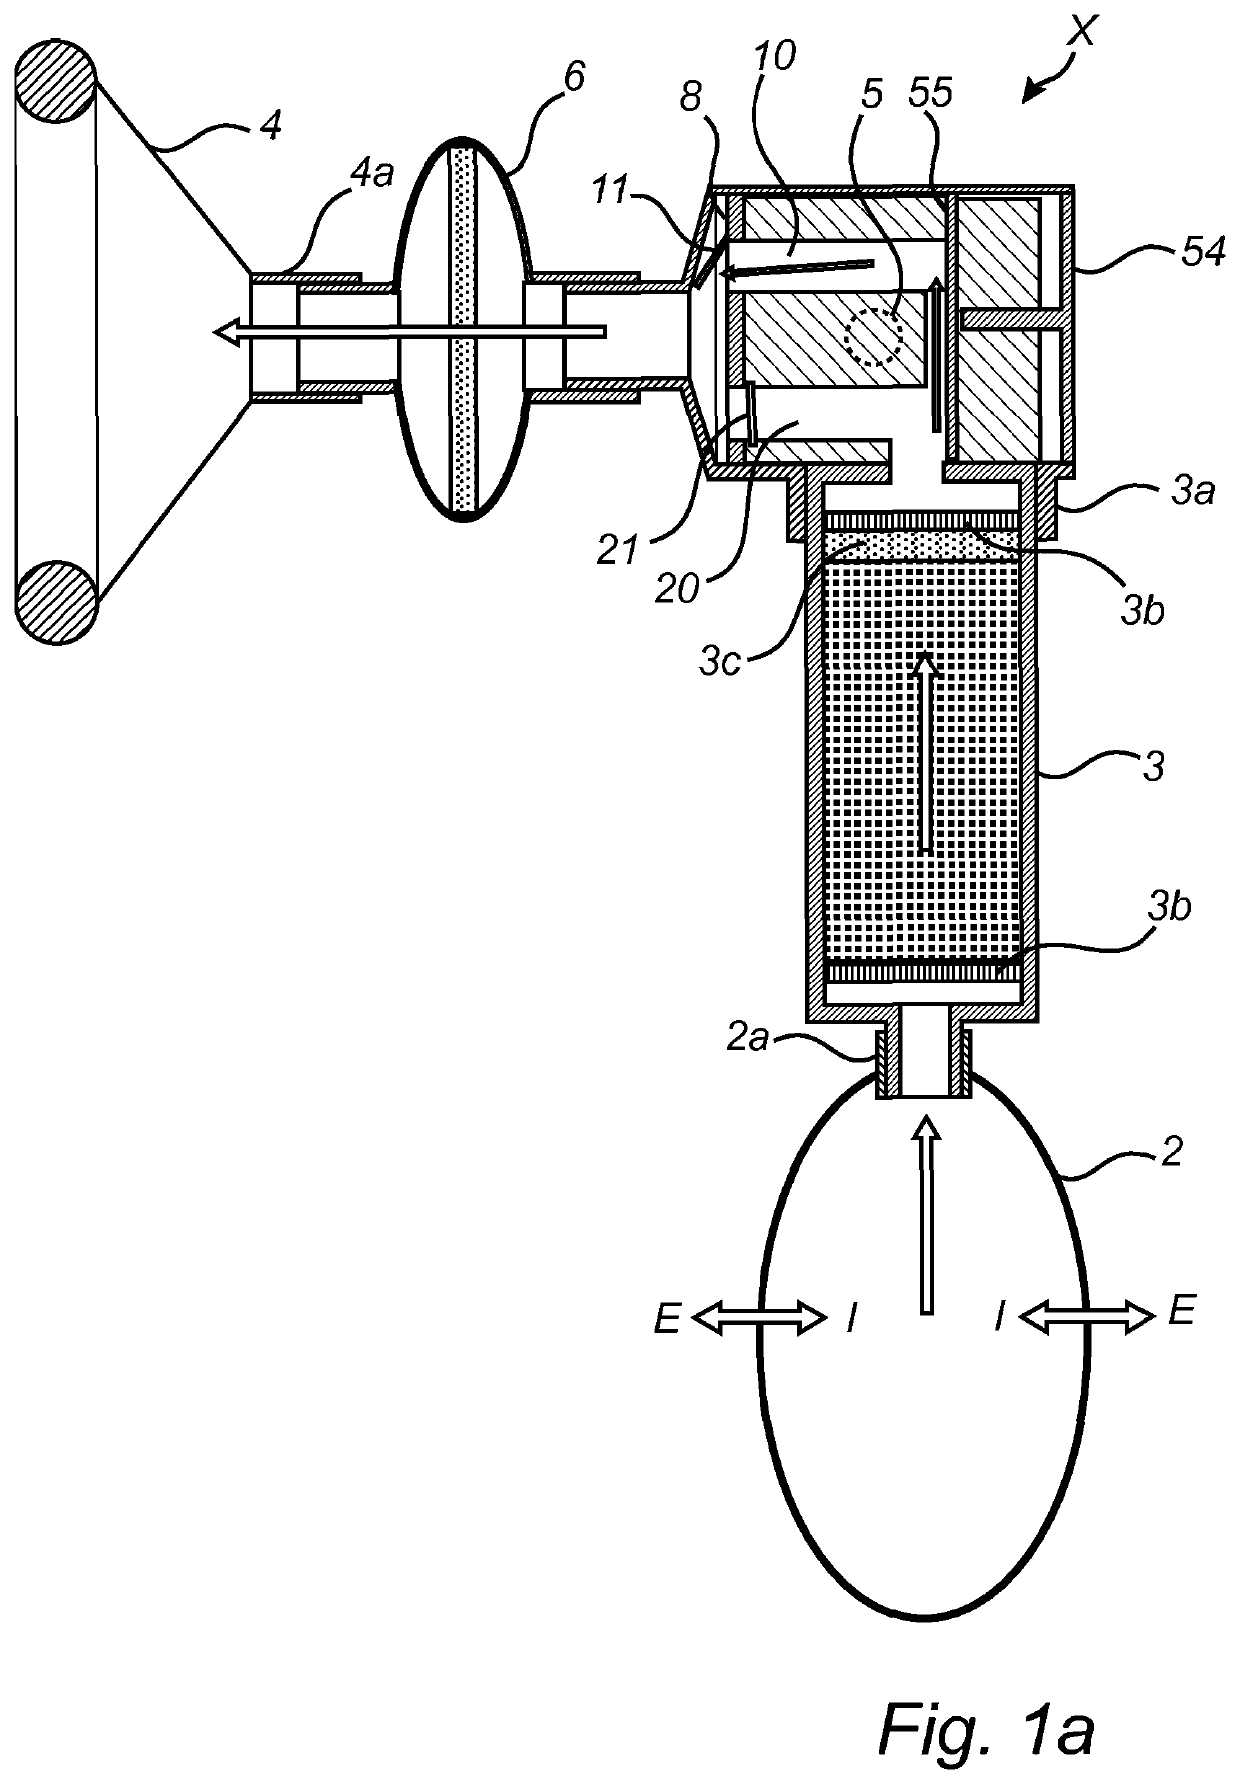 Portable rebreathing system with staged addition of oxygen enrichment